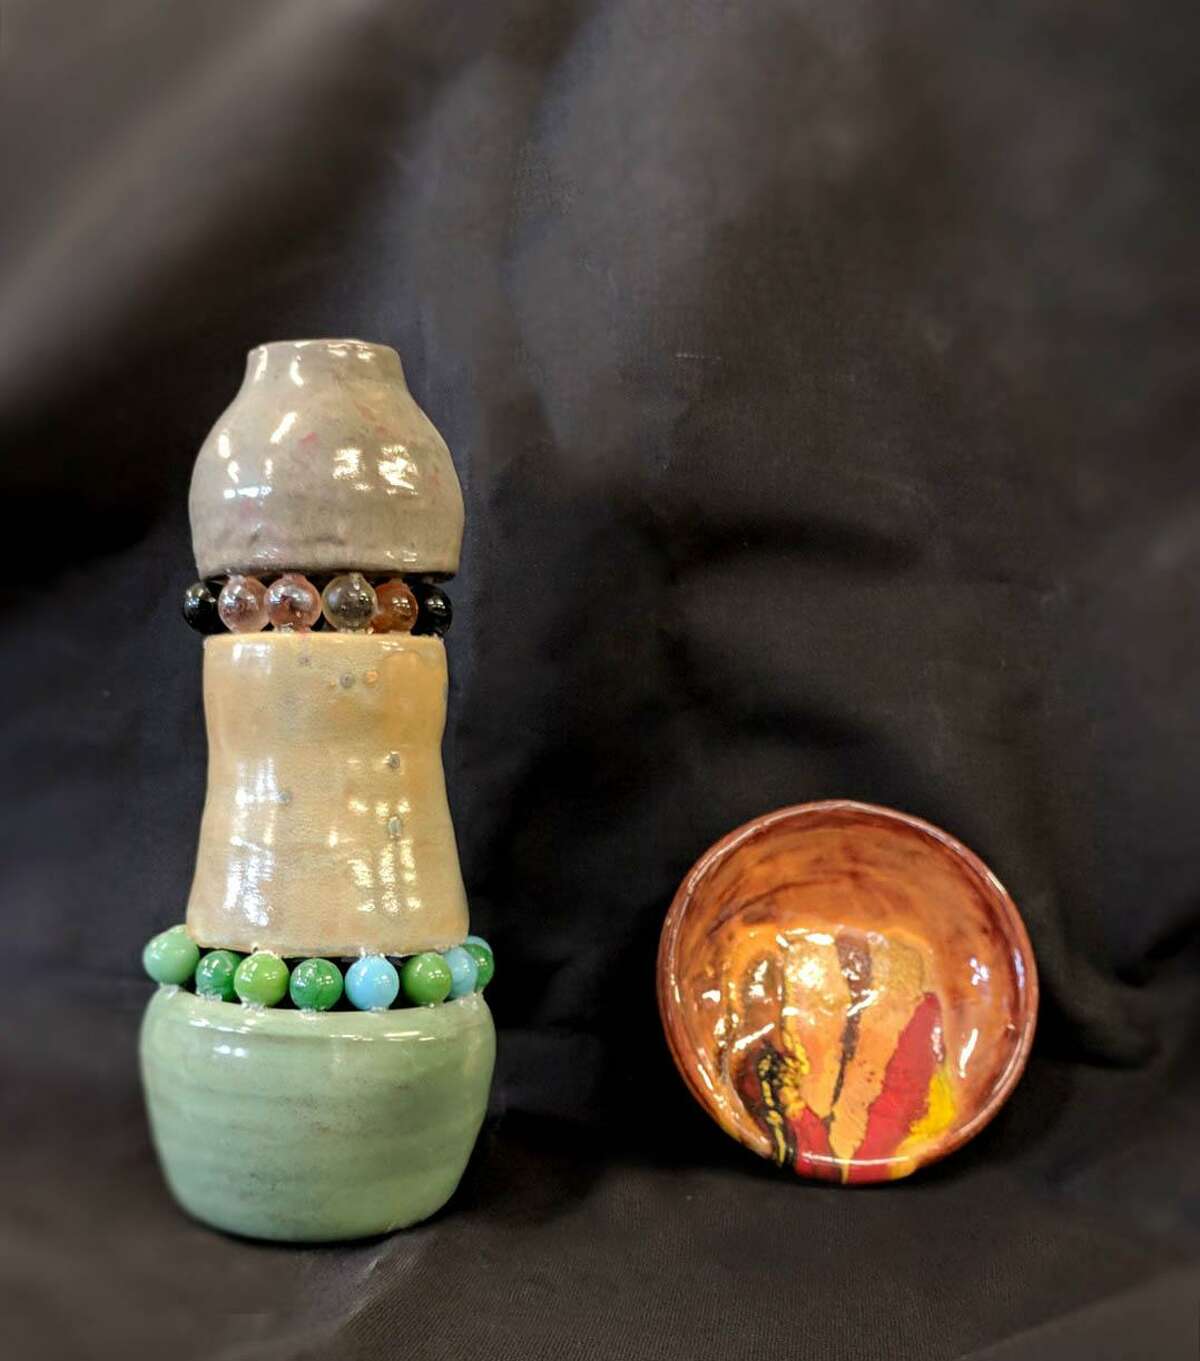 The Village Center for the Arts in New Milford will open ”Marbles,” an exhibit of works by after-school Club Mud ceramic and Saturday Sculpture for Emerging Artists students, March 1 from 6:30 to 8 p.m. at New Milford Public Library. Beginning March 3, the show will remain on exhibit in the reference area glass display case for approximately one month. Above are works by Collin Rozelle, 13, left, and Annika Steurkin, 13. February 2018 Courtesy of the Village Center for the Arts